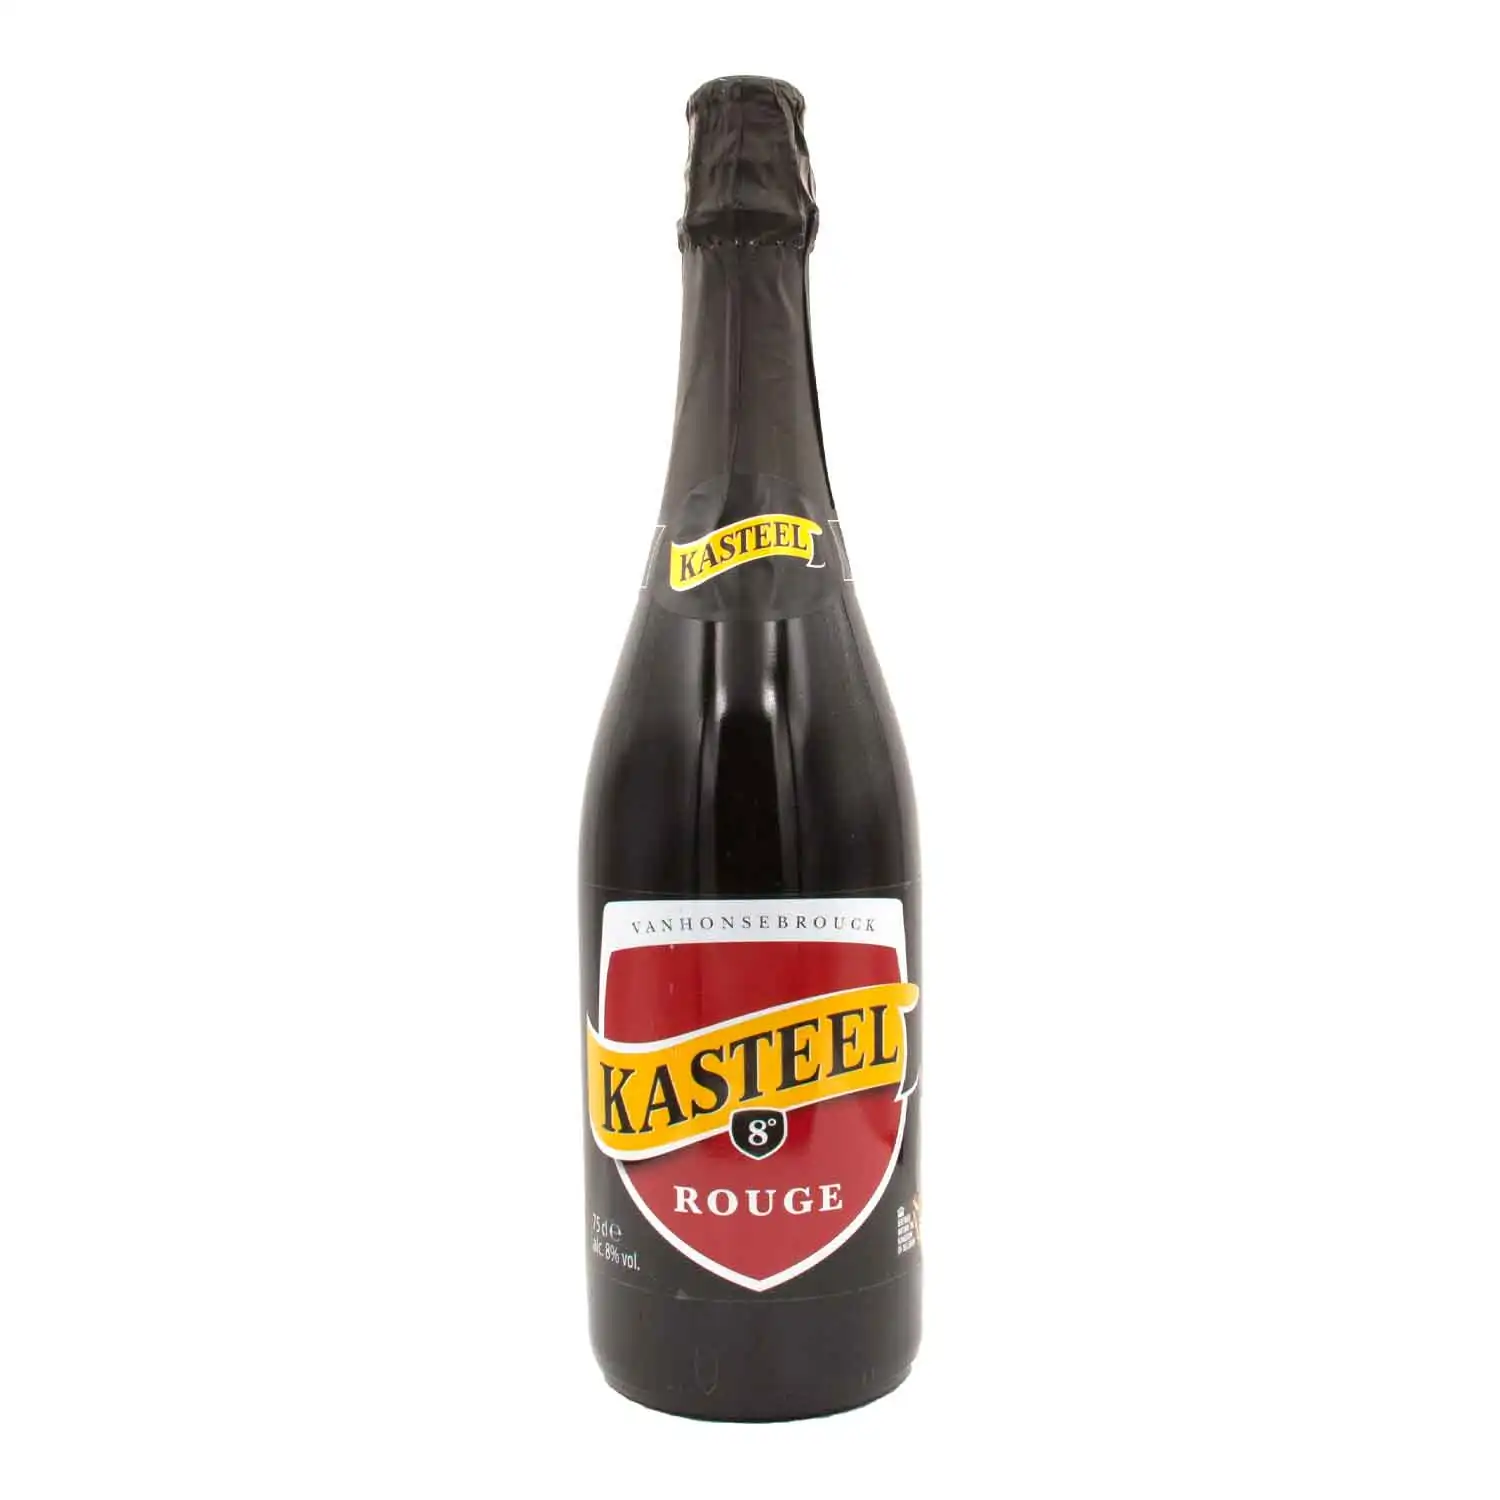 Kasteel red 75cl Alc 8% - Buy at Real Tobacco